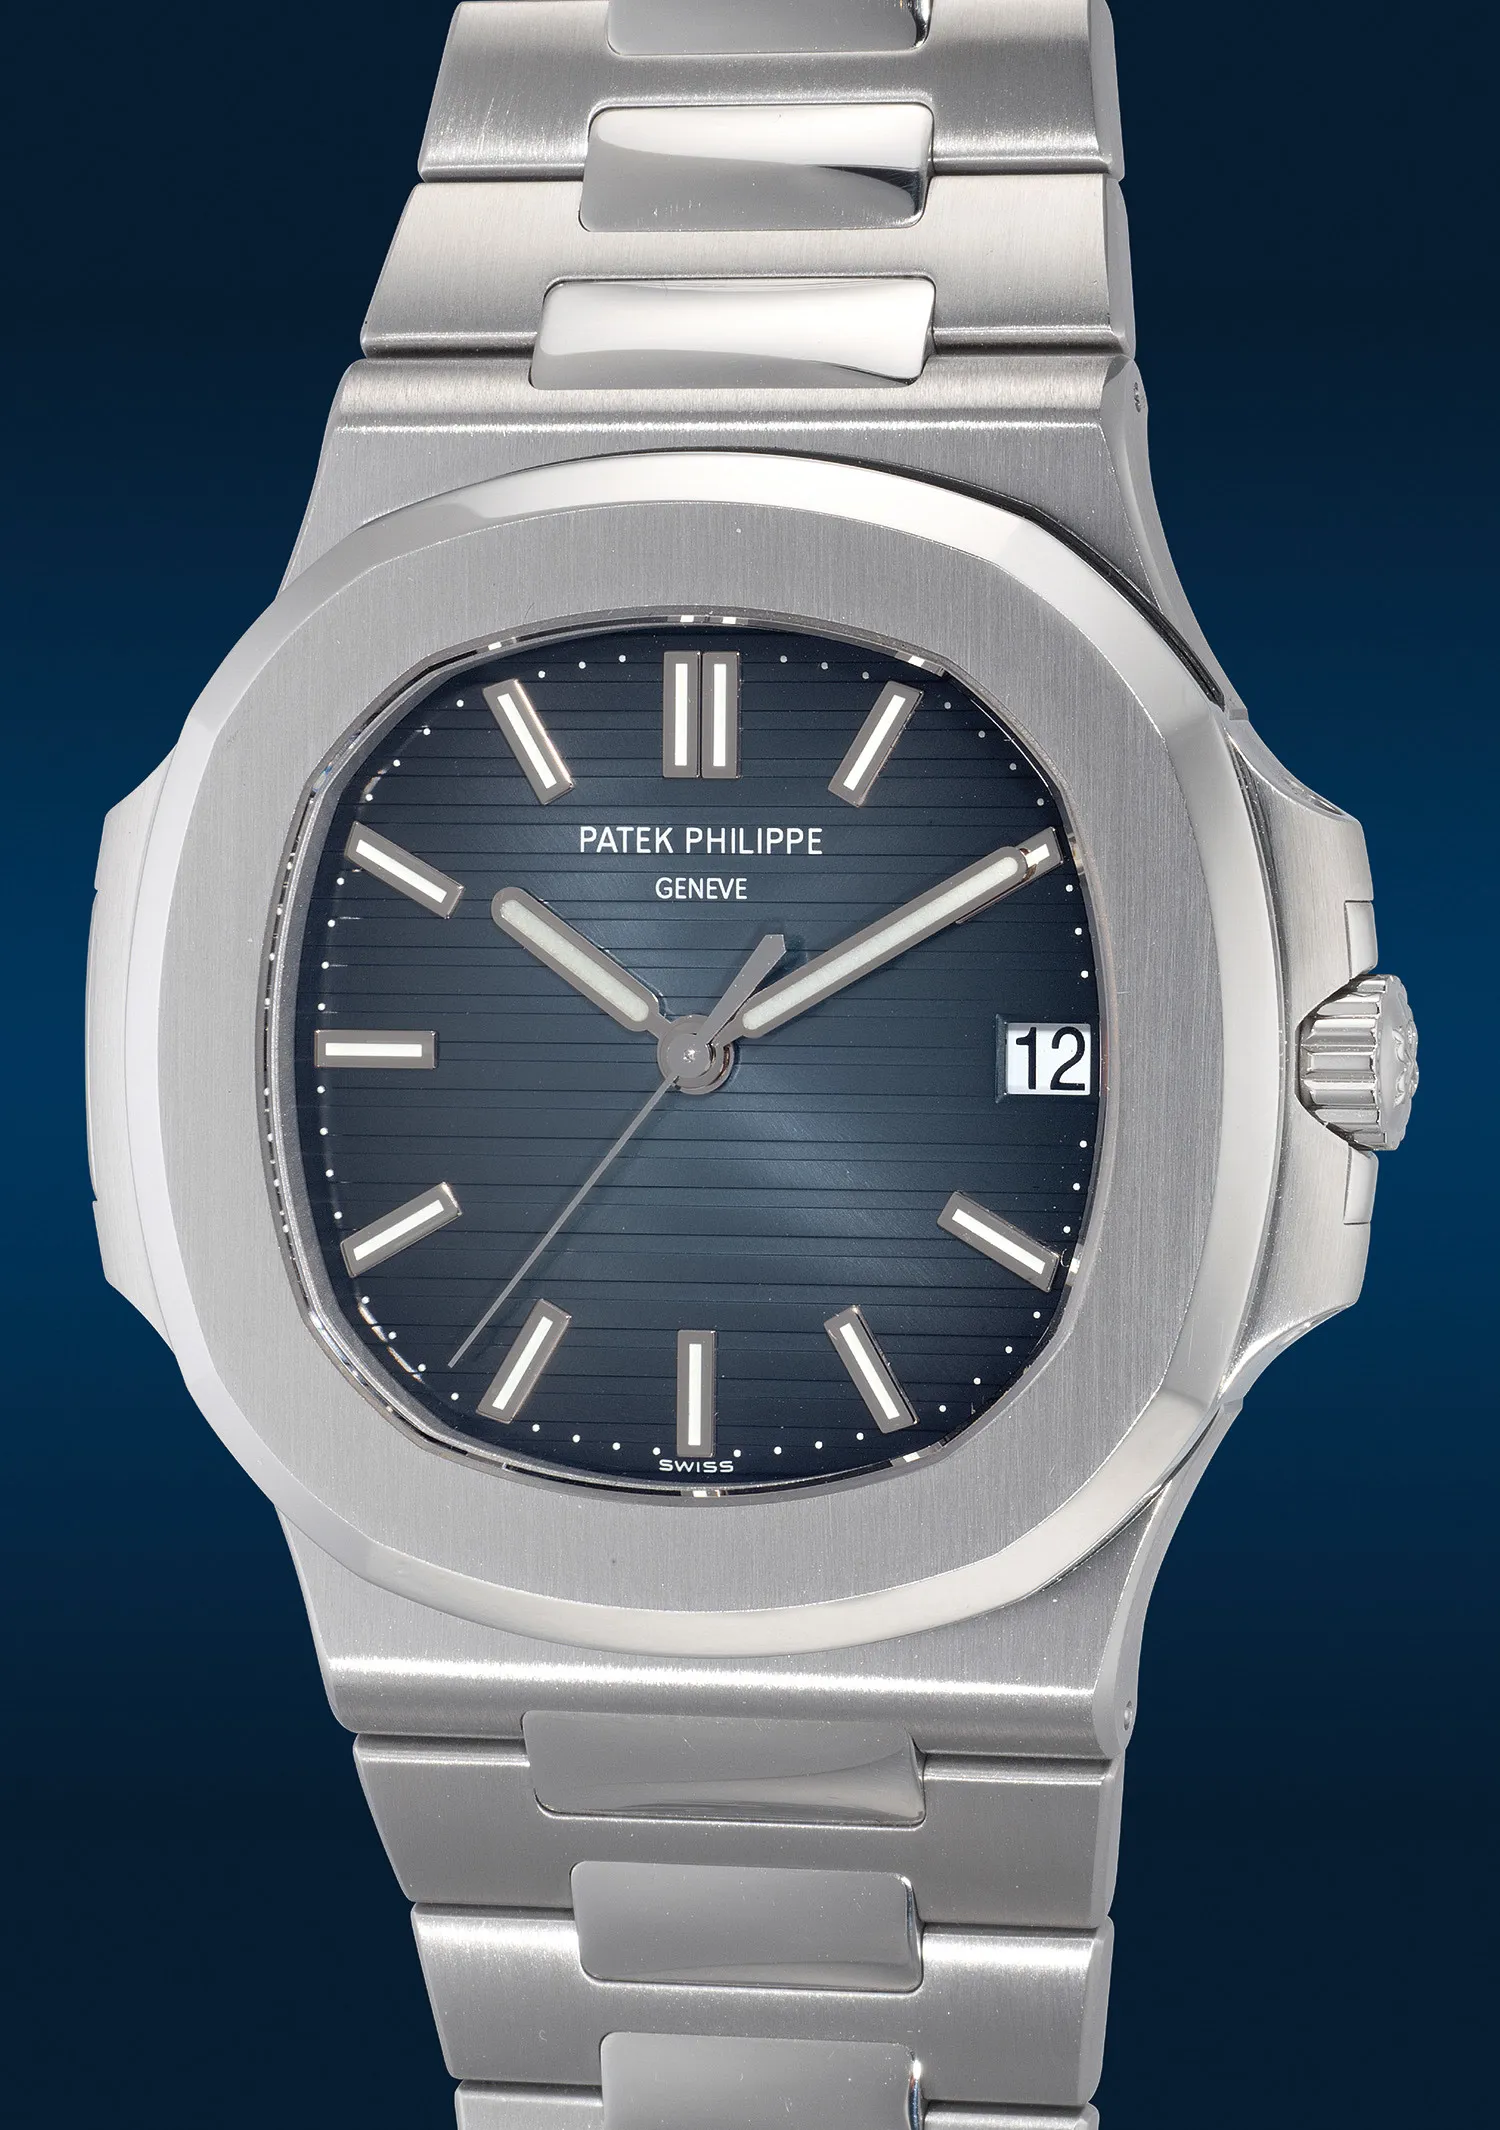 Patek Philippe Nautilus 5711/1A-010 40mm Stainless steel